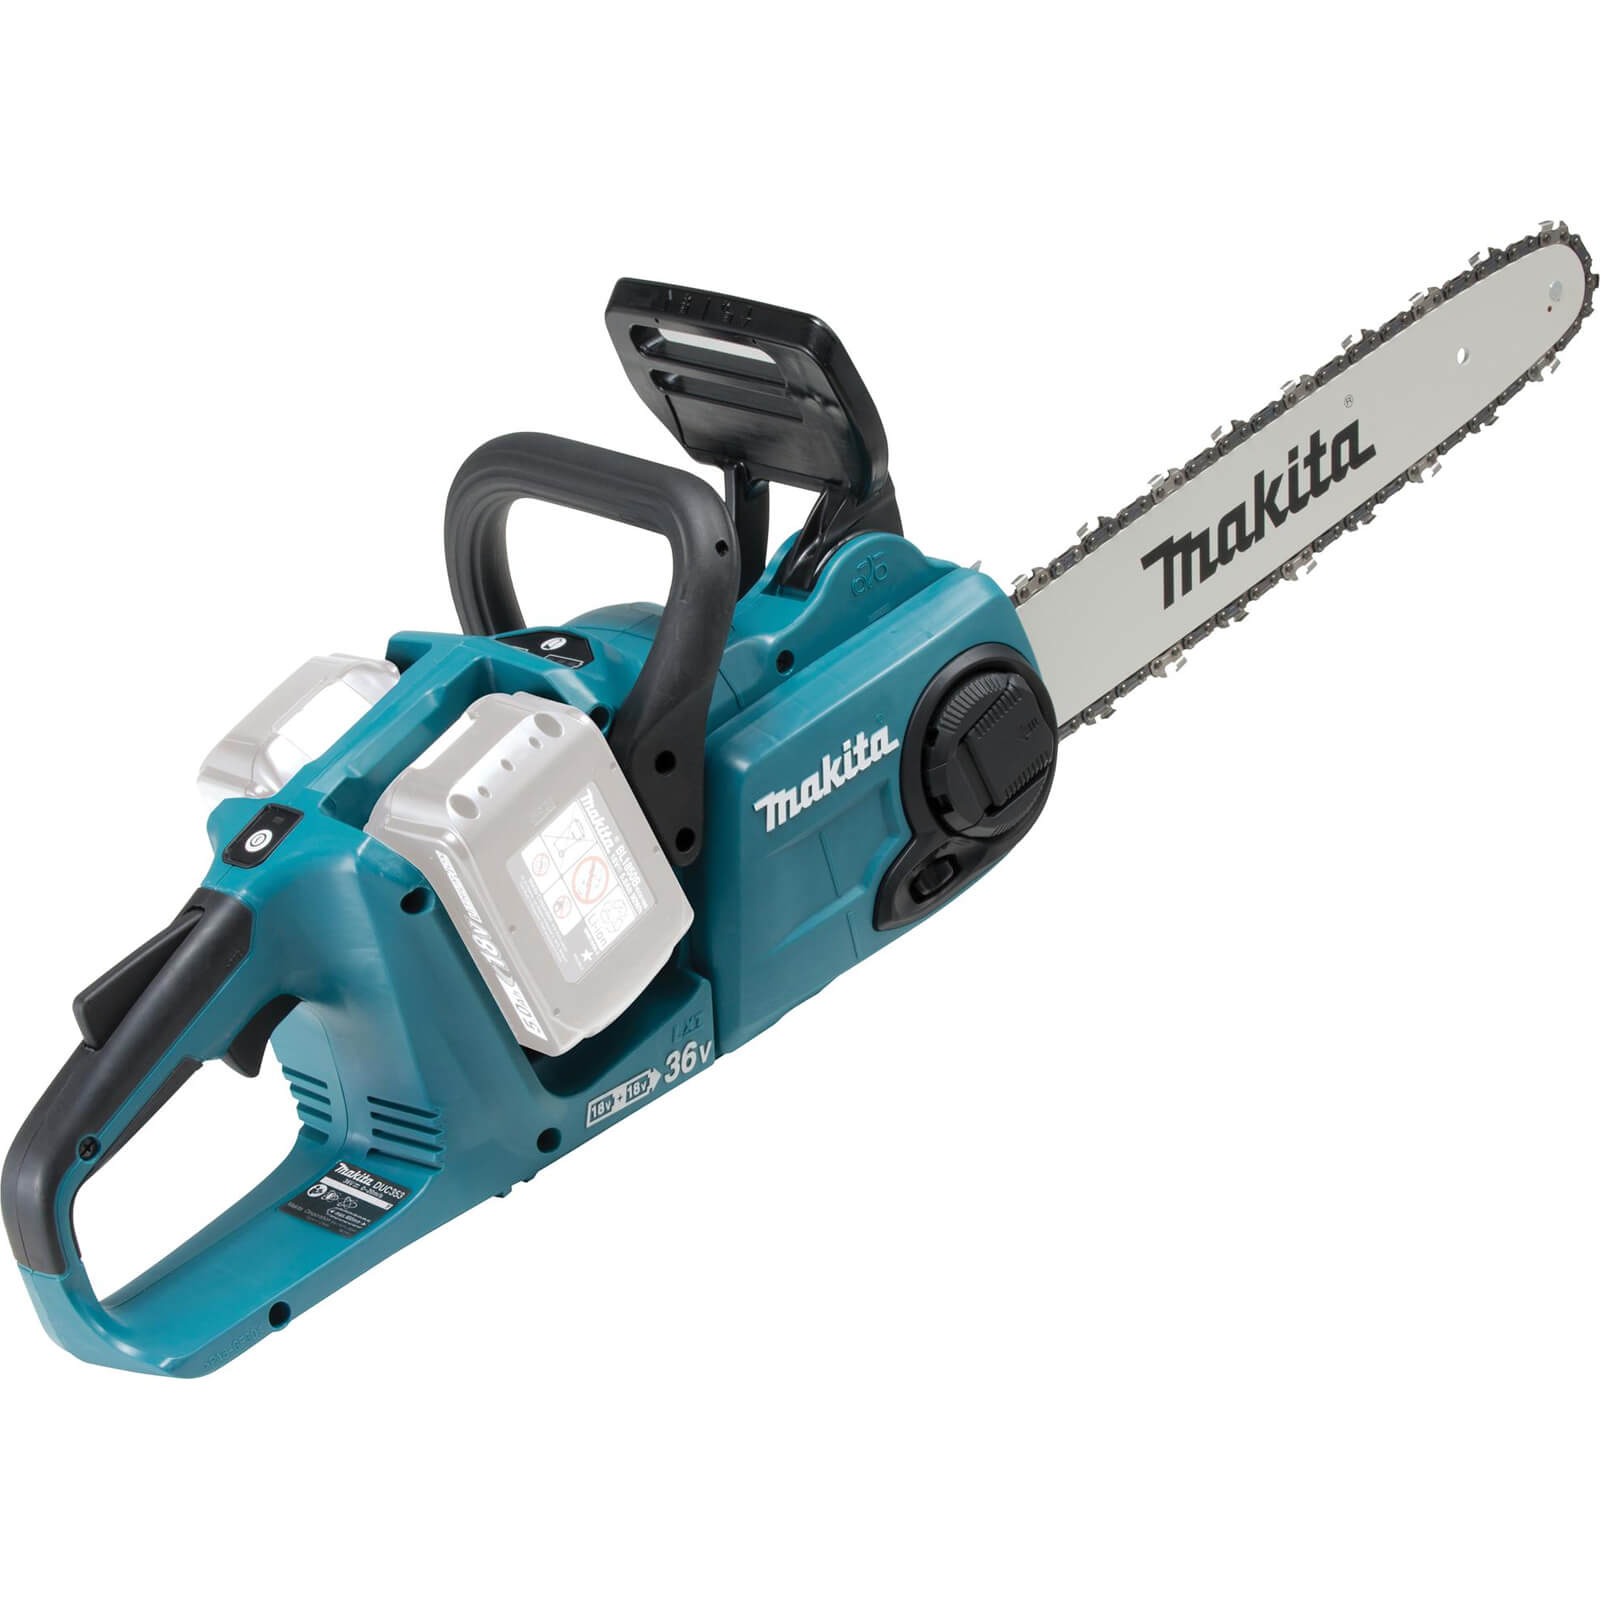 Image of Makita DUC353 Twin 18v LXT Cordless Brushless Chainsaw 350mm No Batteries No Charger